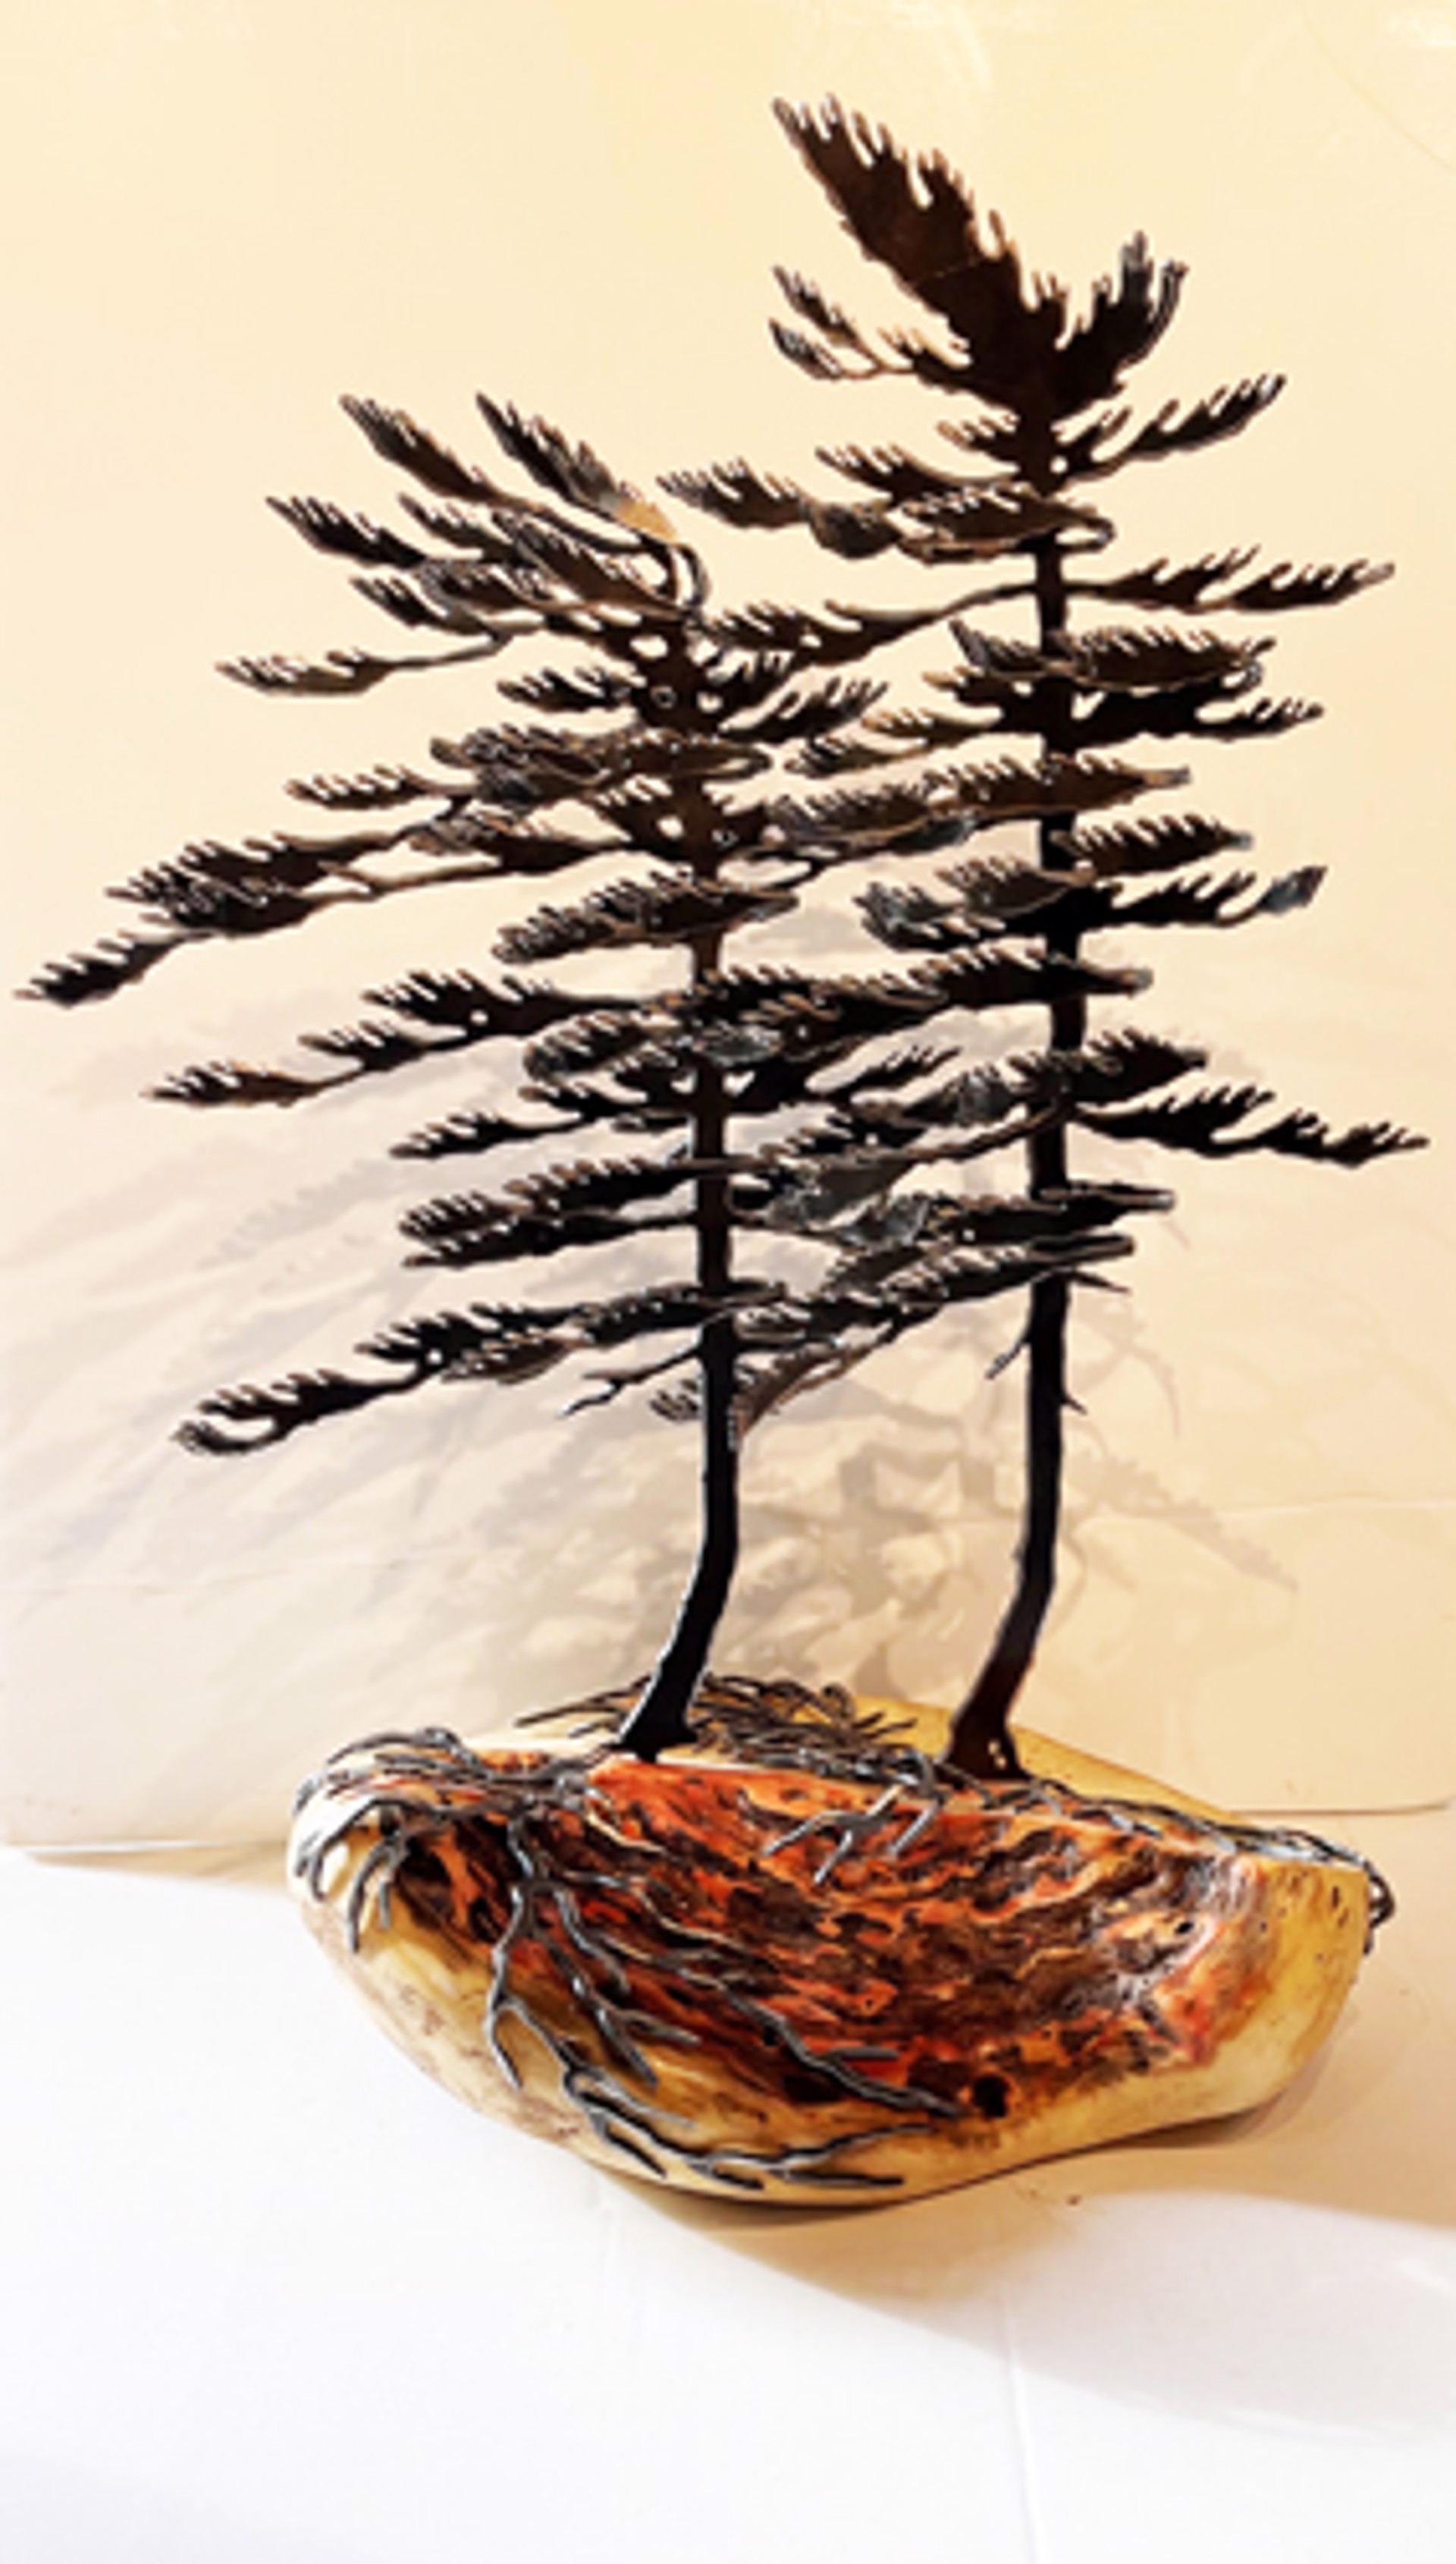 Two Windswept Pine on Maple 659537 by Cathy Mark